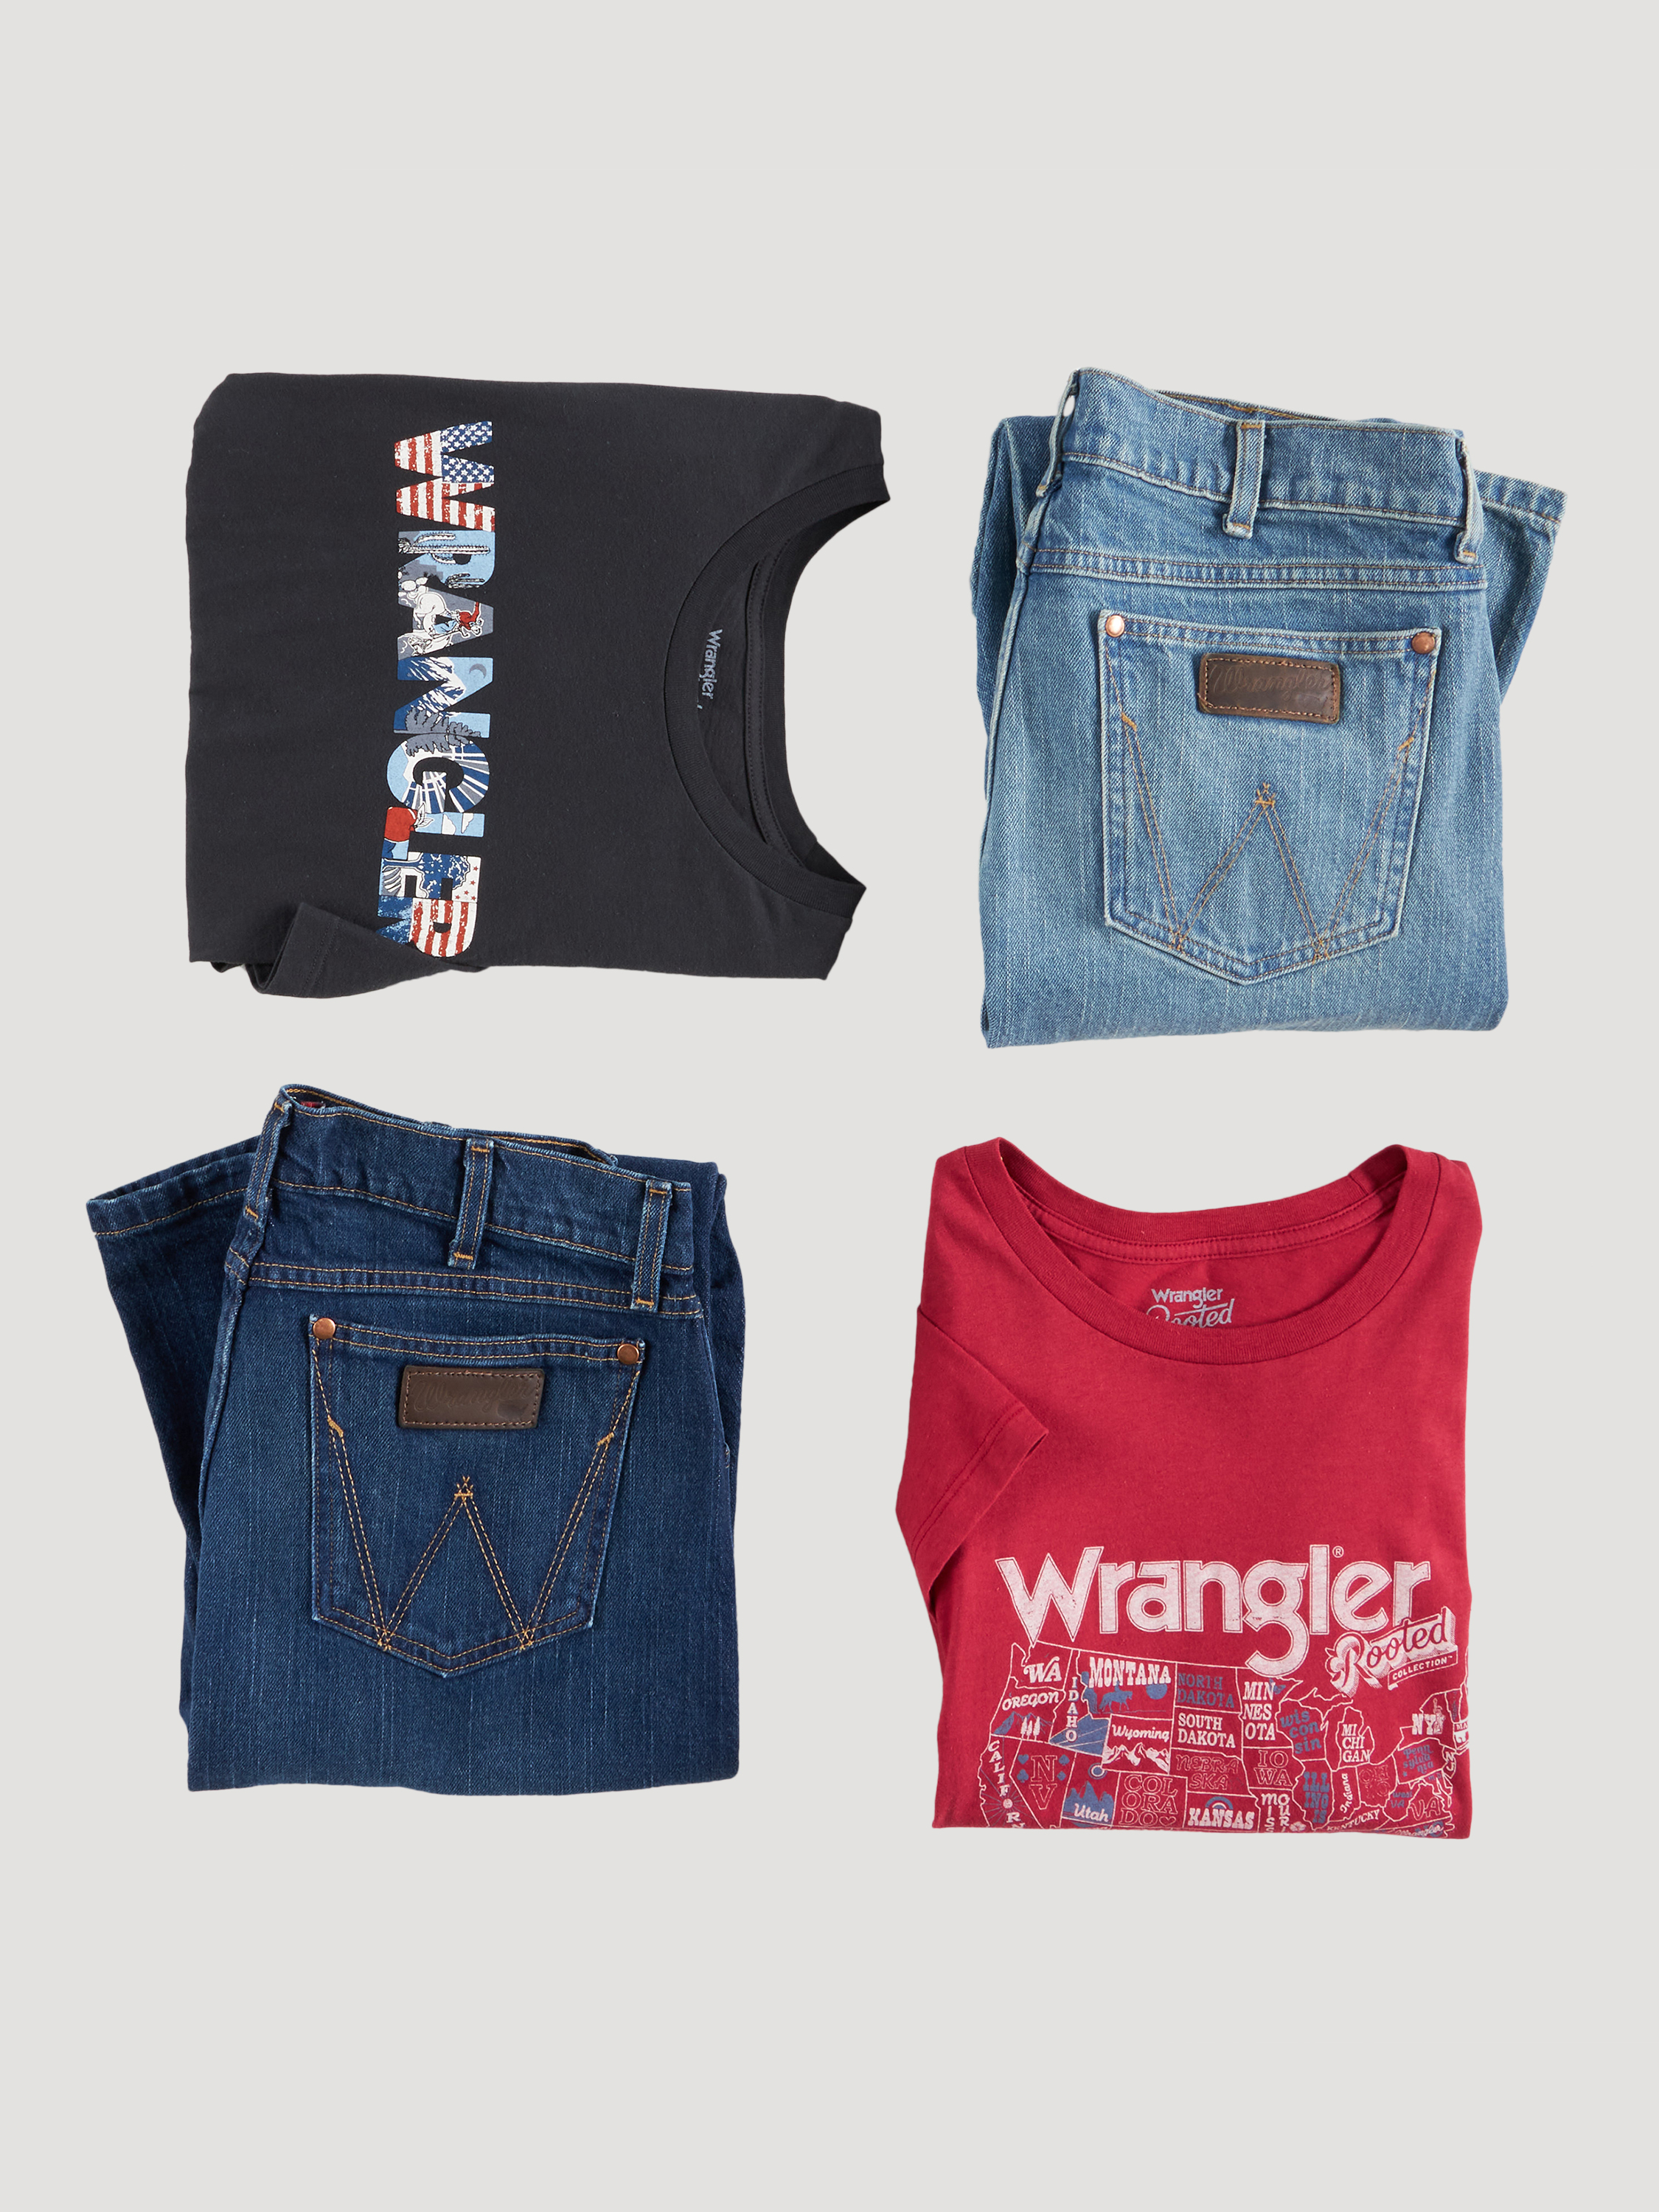 Wrangler® Expands Made in USA Collection with 100% Traceable Cotton Grown  by American Farmers | Business Wire